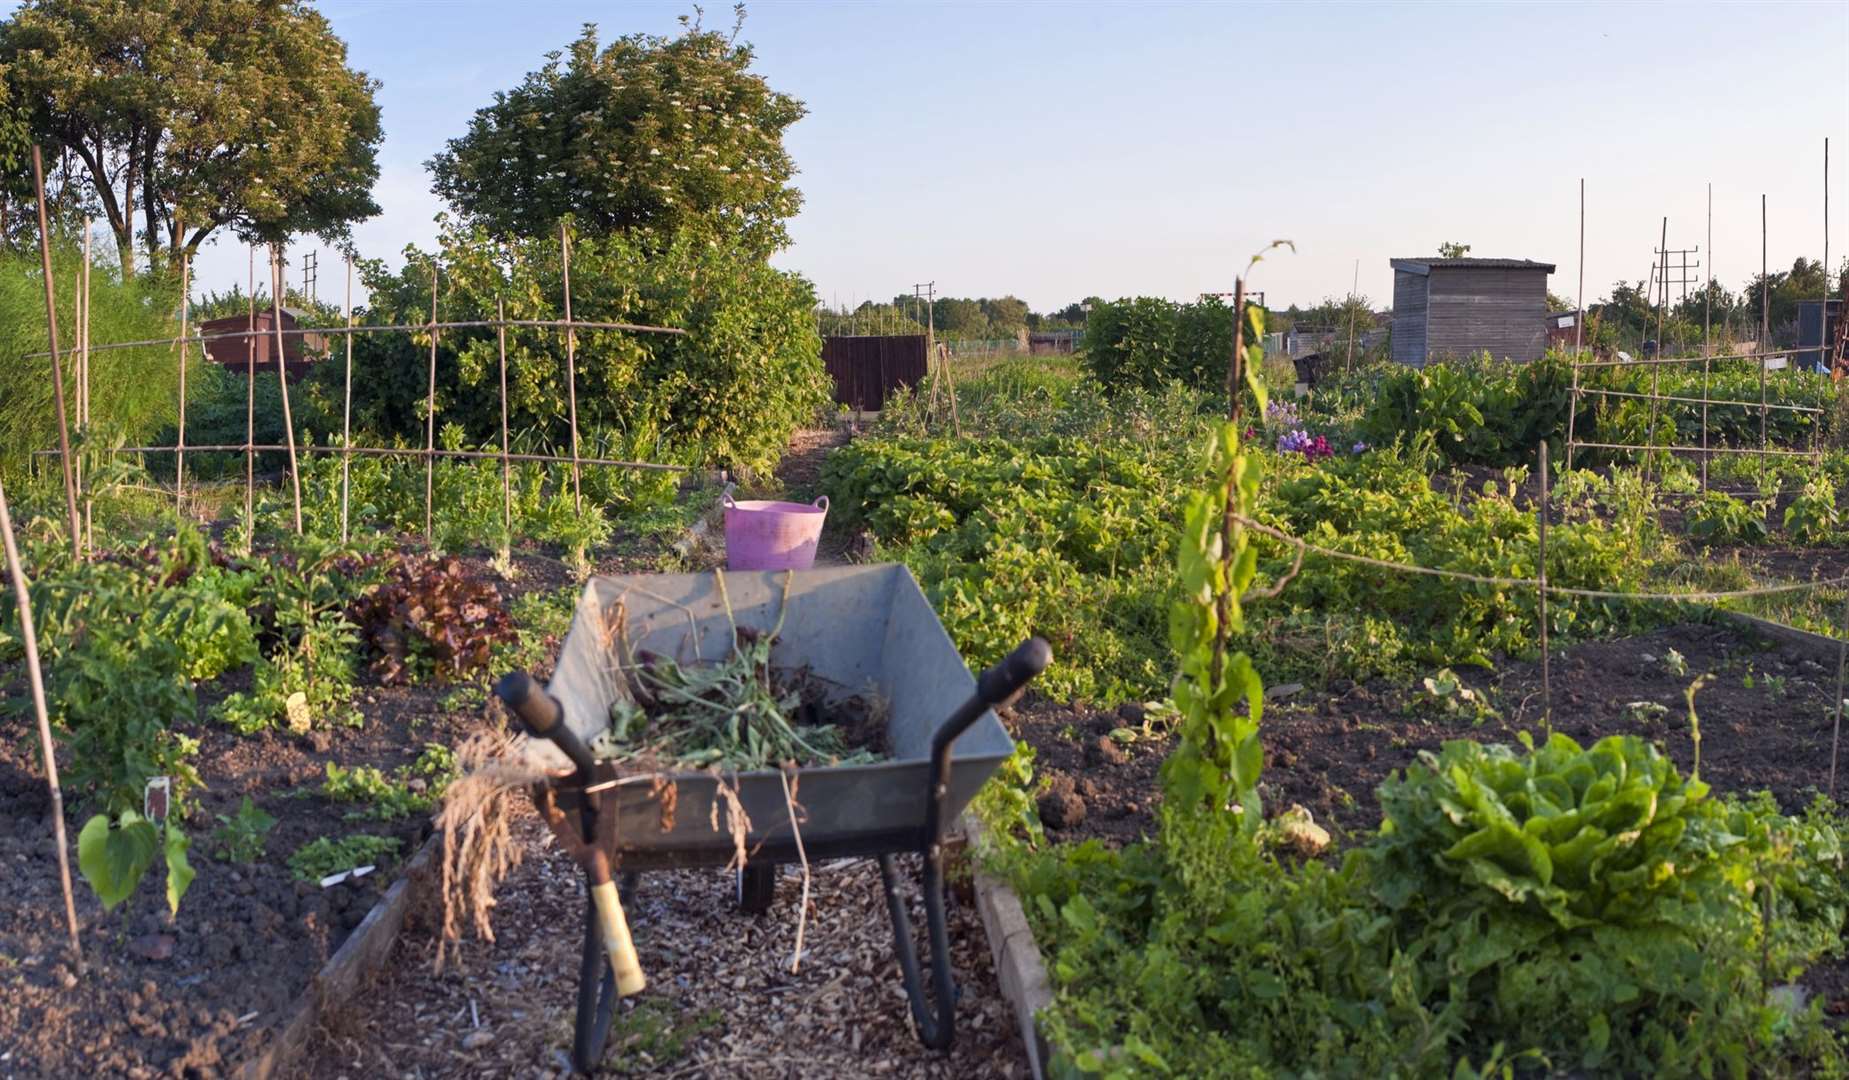 You could visit some allotments this weekend